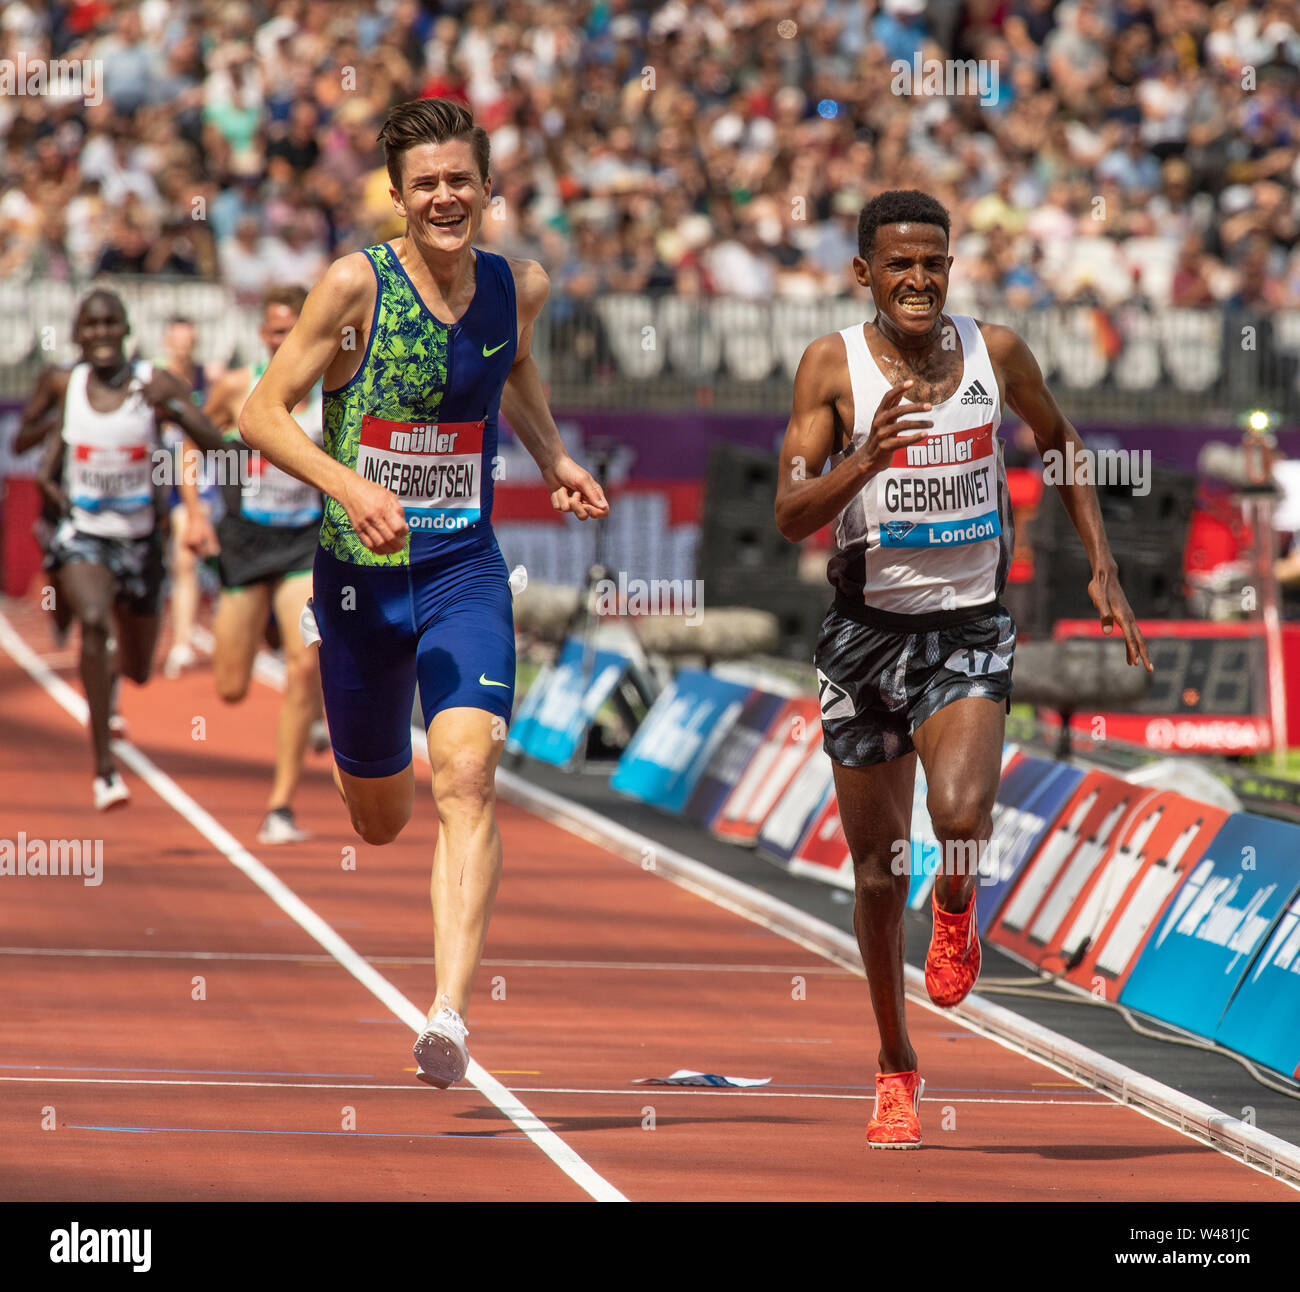 London, UK. 20th July, 2019. LONDON, ENGLAND - JULY 20: Jakob Ingebrigtsen of Norway and Hagos Gebrhiwet of Ethiopia (R) race to the finishing line in the Men's 5000m during Day One of the Muller Anniversary Games IAAF Diamond League event at the London Stadium on July 20, 2019 in London, England. Gary Mitchell/ Alamy Live News Stock Photo